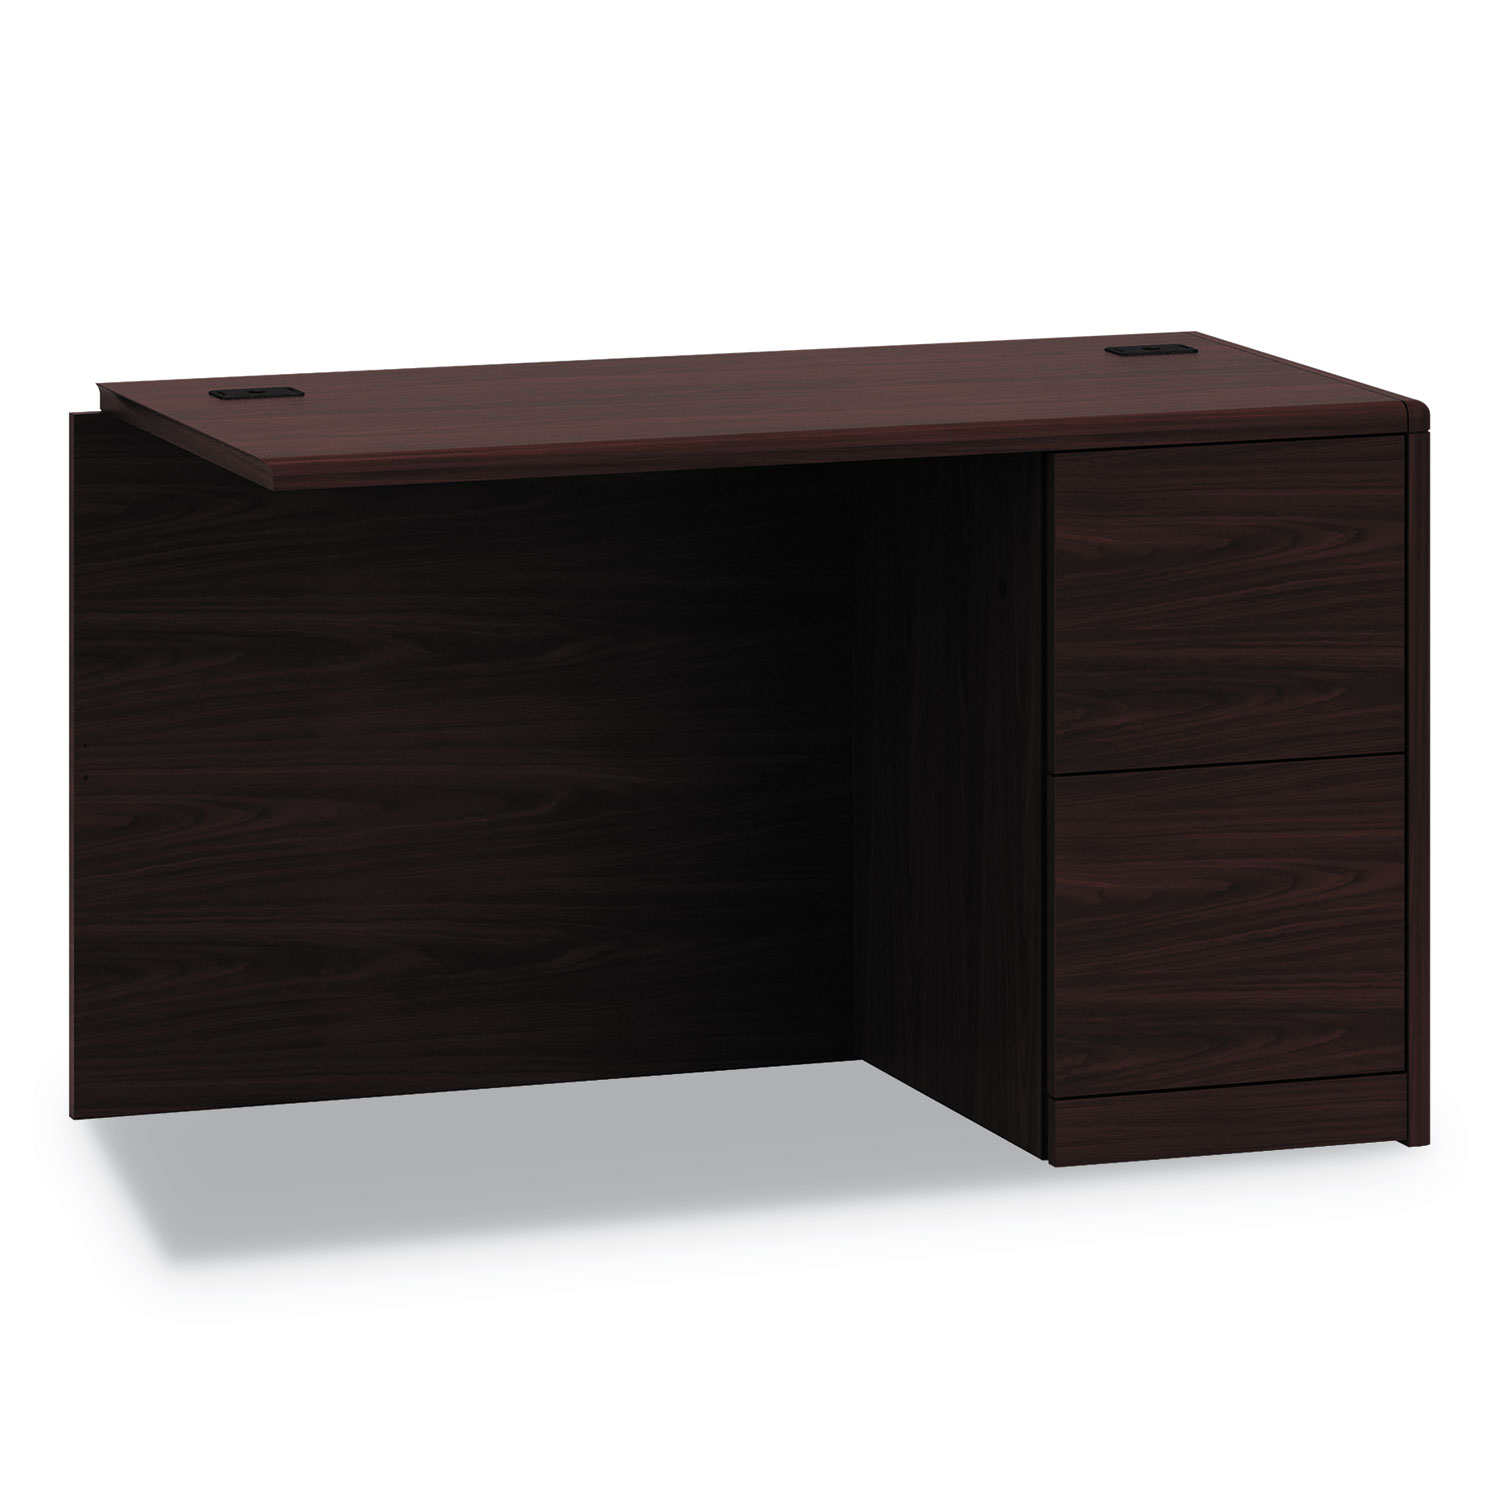 HON 10700 Series File/File Right Return - 2-Drawer - 48" x 24" x 29.5" - 2 x File Drawer(s)Right Side - Waterfall Edge - Finish: